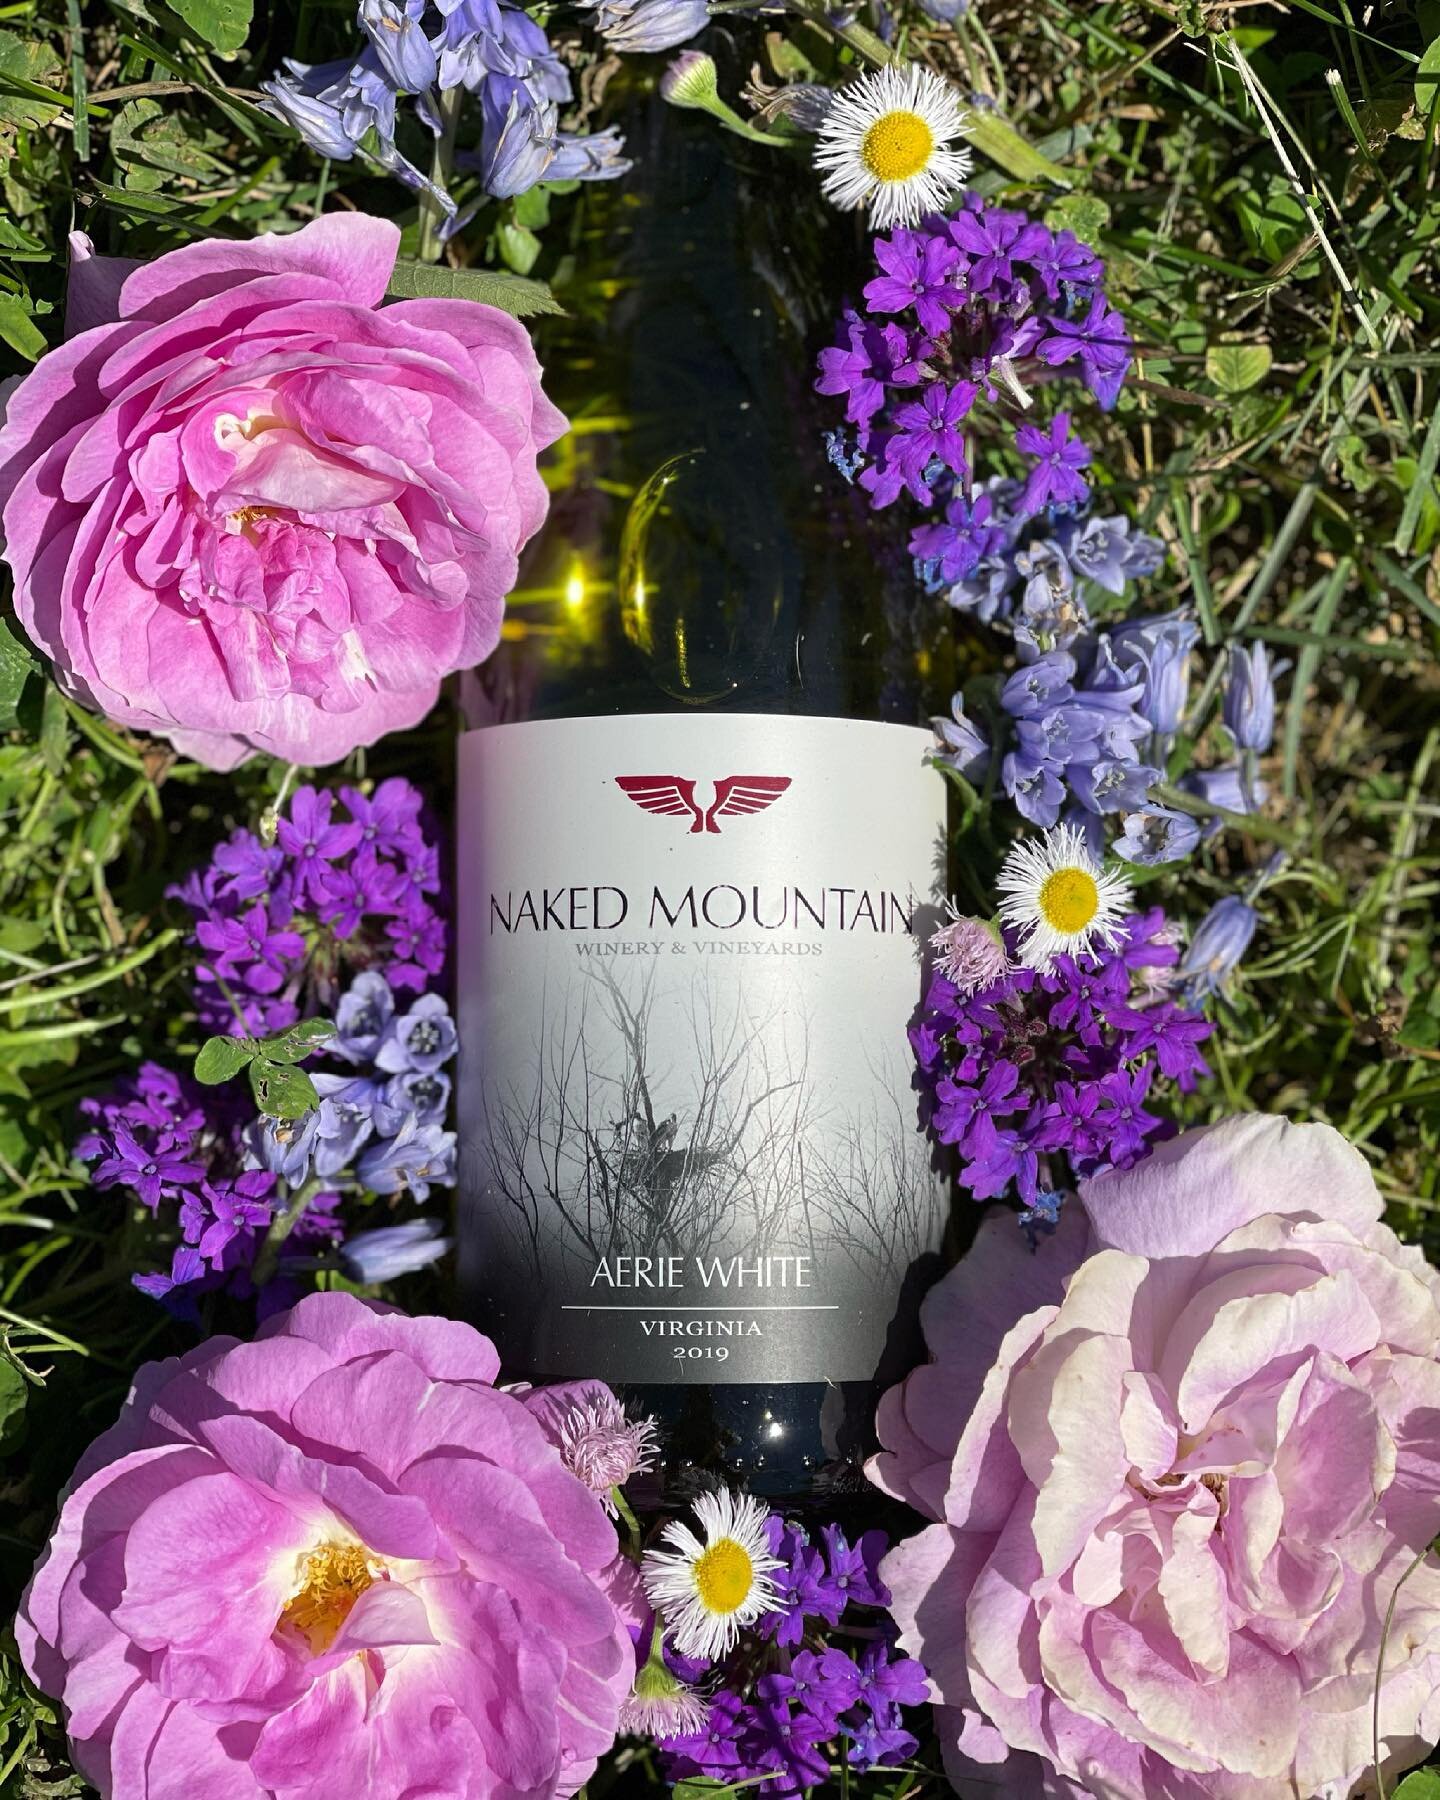 !!!NEW WINE ALERT!!!
Our 2019 Aerie White is here!
40% Petit Manseng, 35% Viognier, 25% Chardonnay.
Come out for great wine and live music from 12-4pm! 🍷 #DrinkNaked 

#nakedmountainwinery #drinklocal #shoplocal #vatourism #vawinetogether #winelover